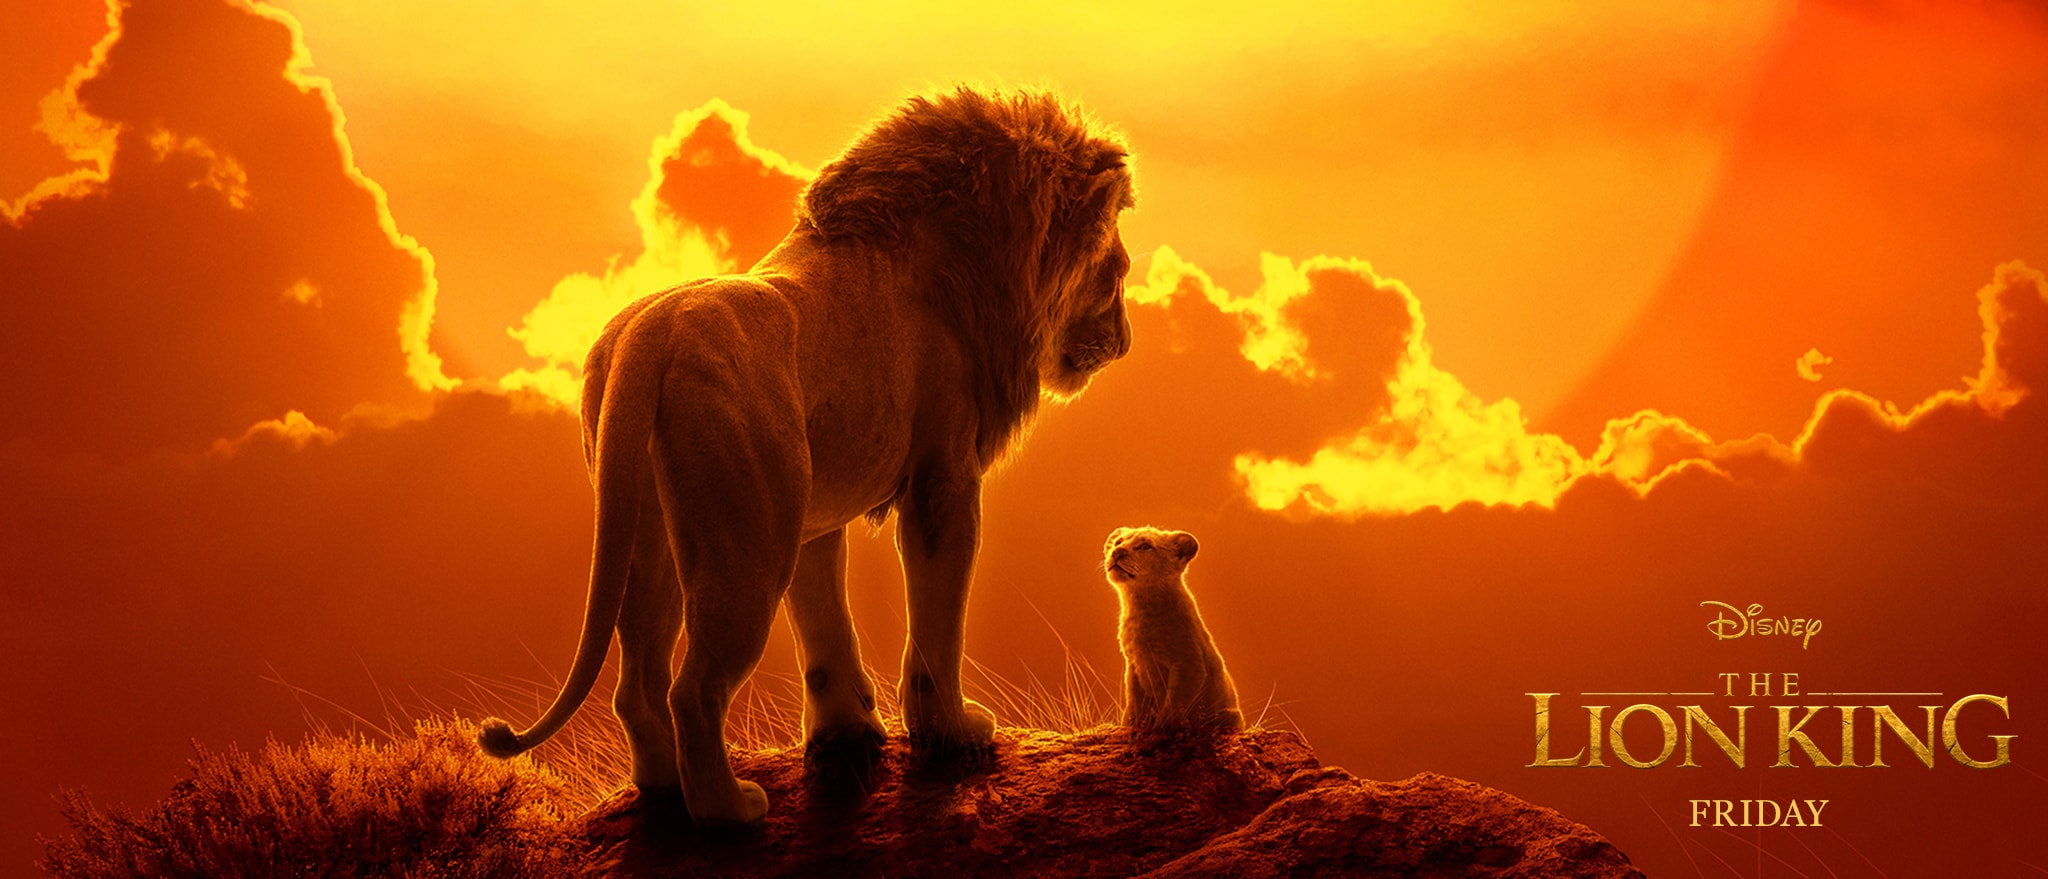 The Lion King (2019) HD Print Torrent Download Links Leaked